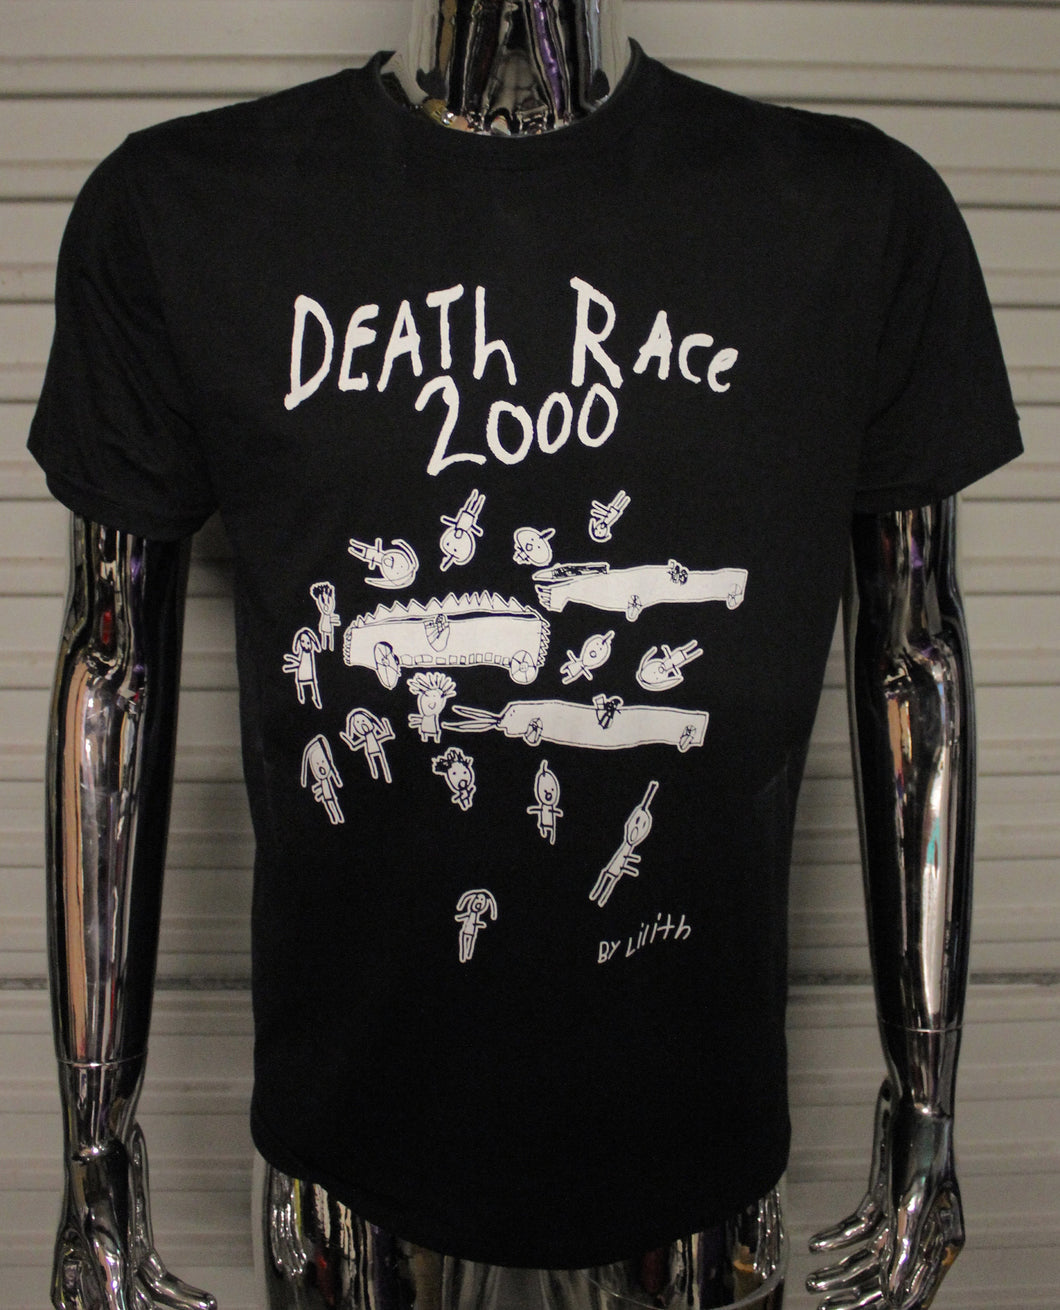 Death Race 2000 By Lilith T-shirt